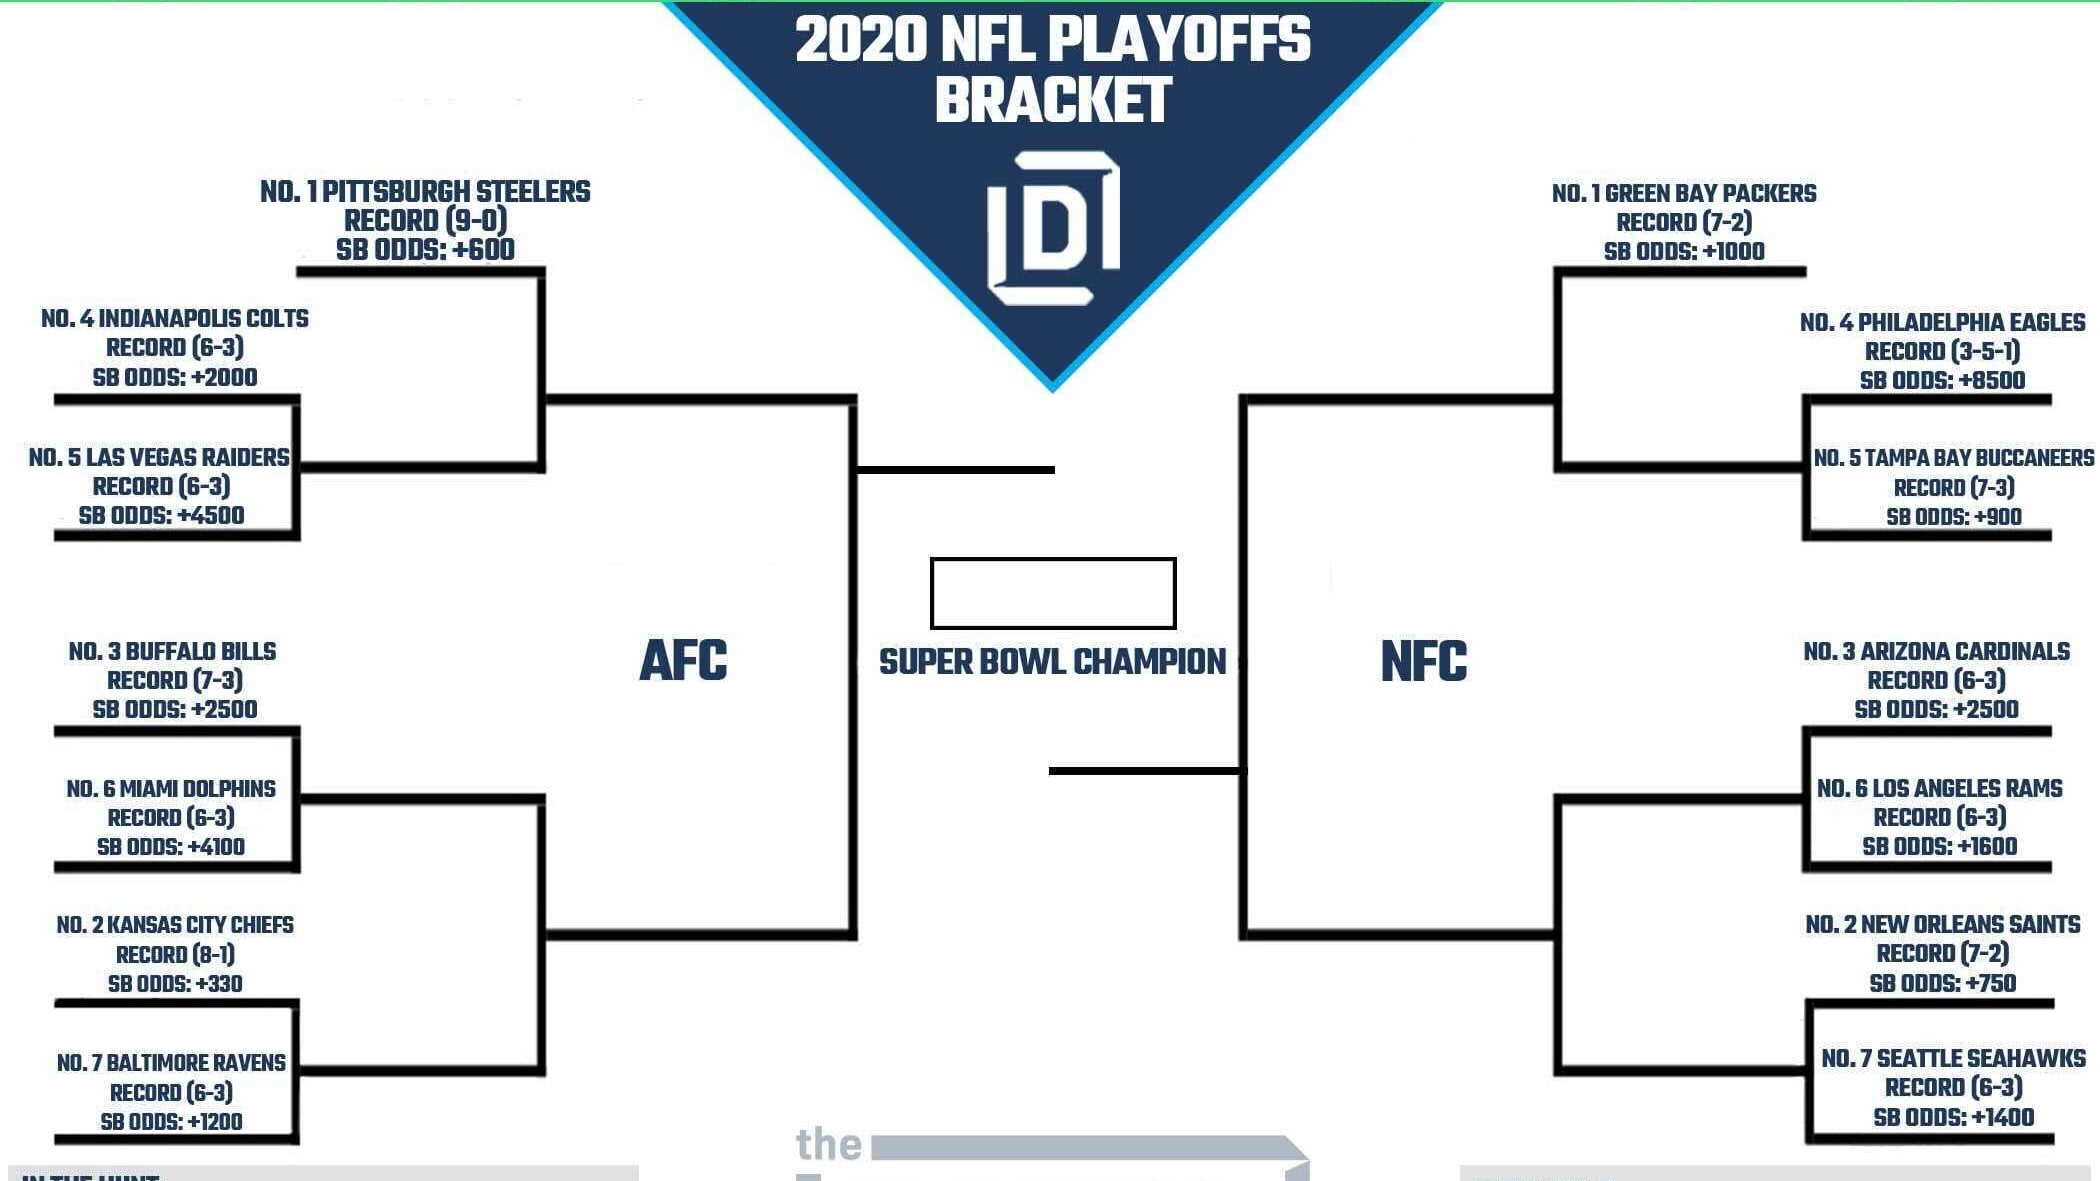 NFL Playoff Picture and 2020 Bracket for NFC and AFC Heading Into Week 11